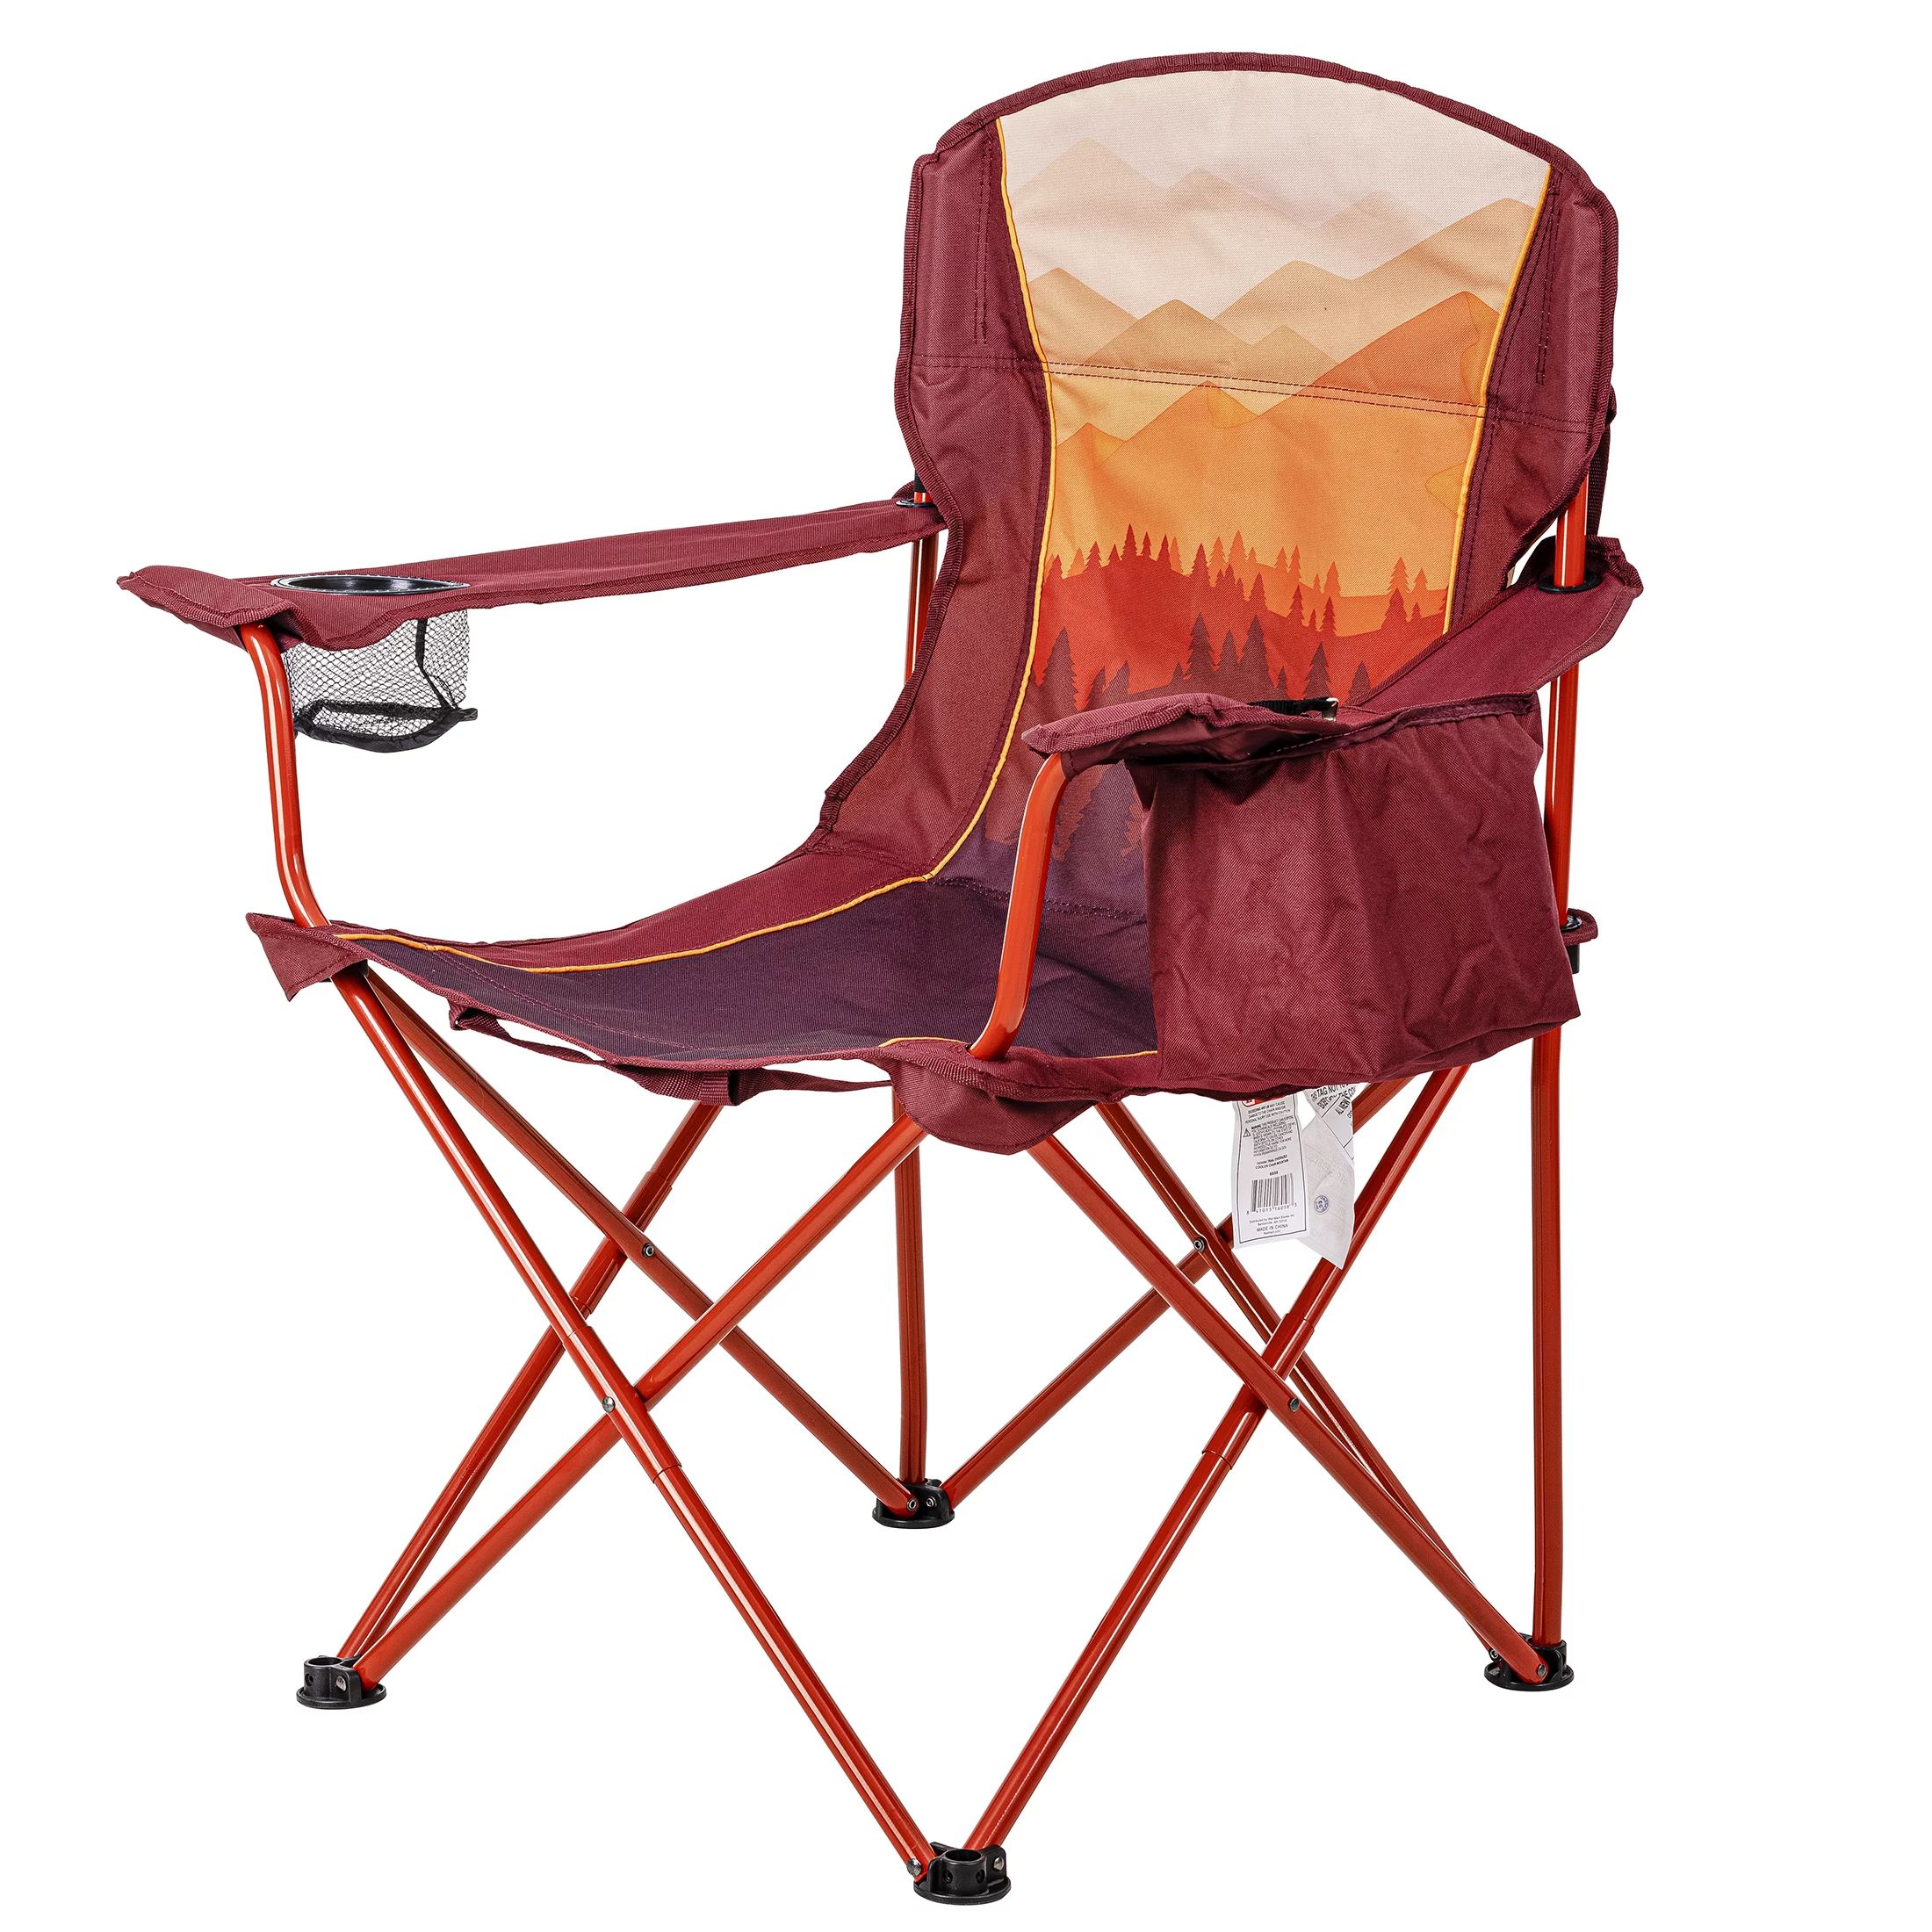 Ozark Trail Oversized Camp Chair with Cooler, Ombre Mountains Design, Red and Orange | Walmart (US)